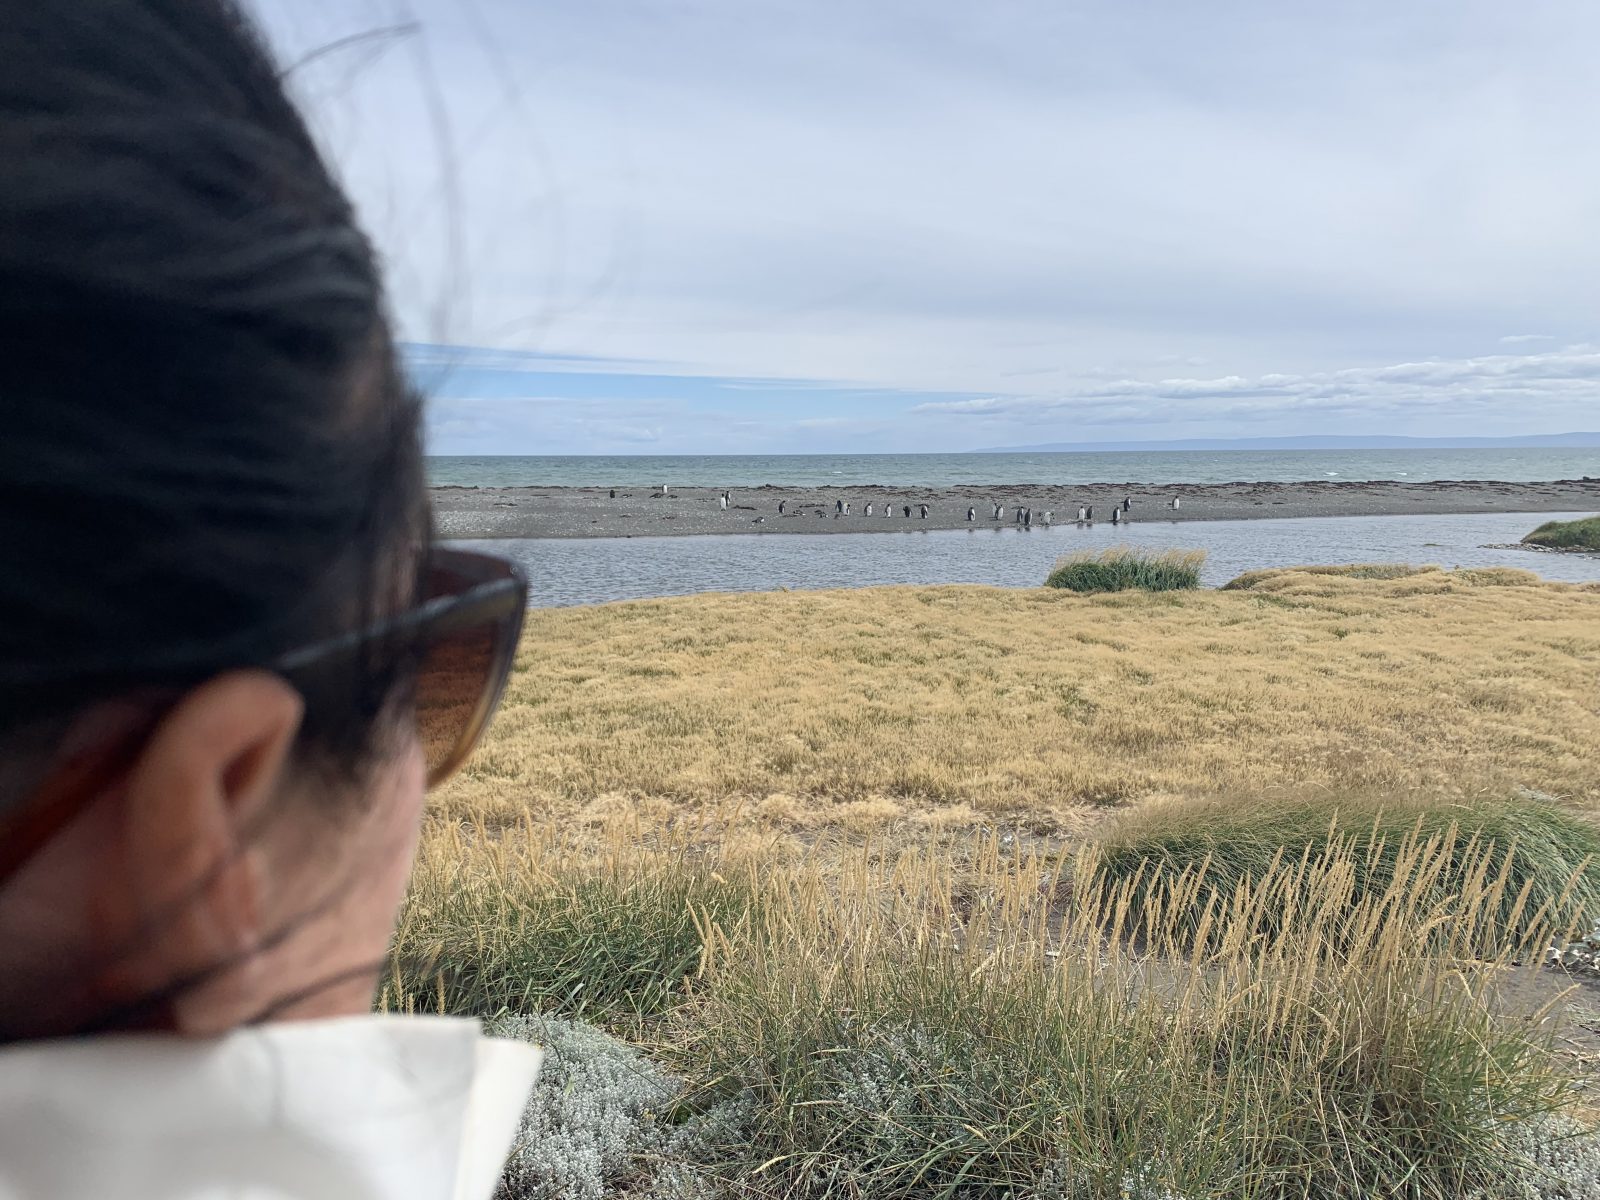 Day trip to see the King Penguins in Porvenir, from Punta Arenas